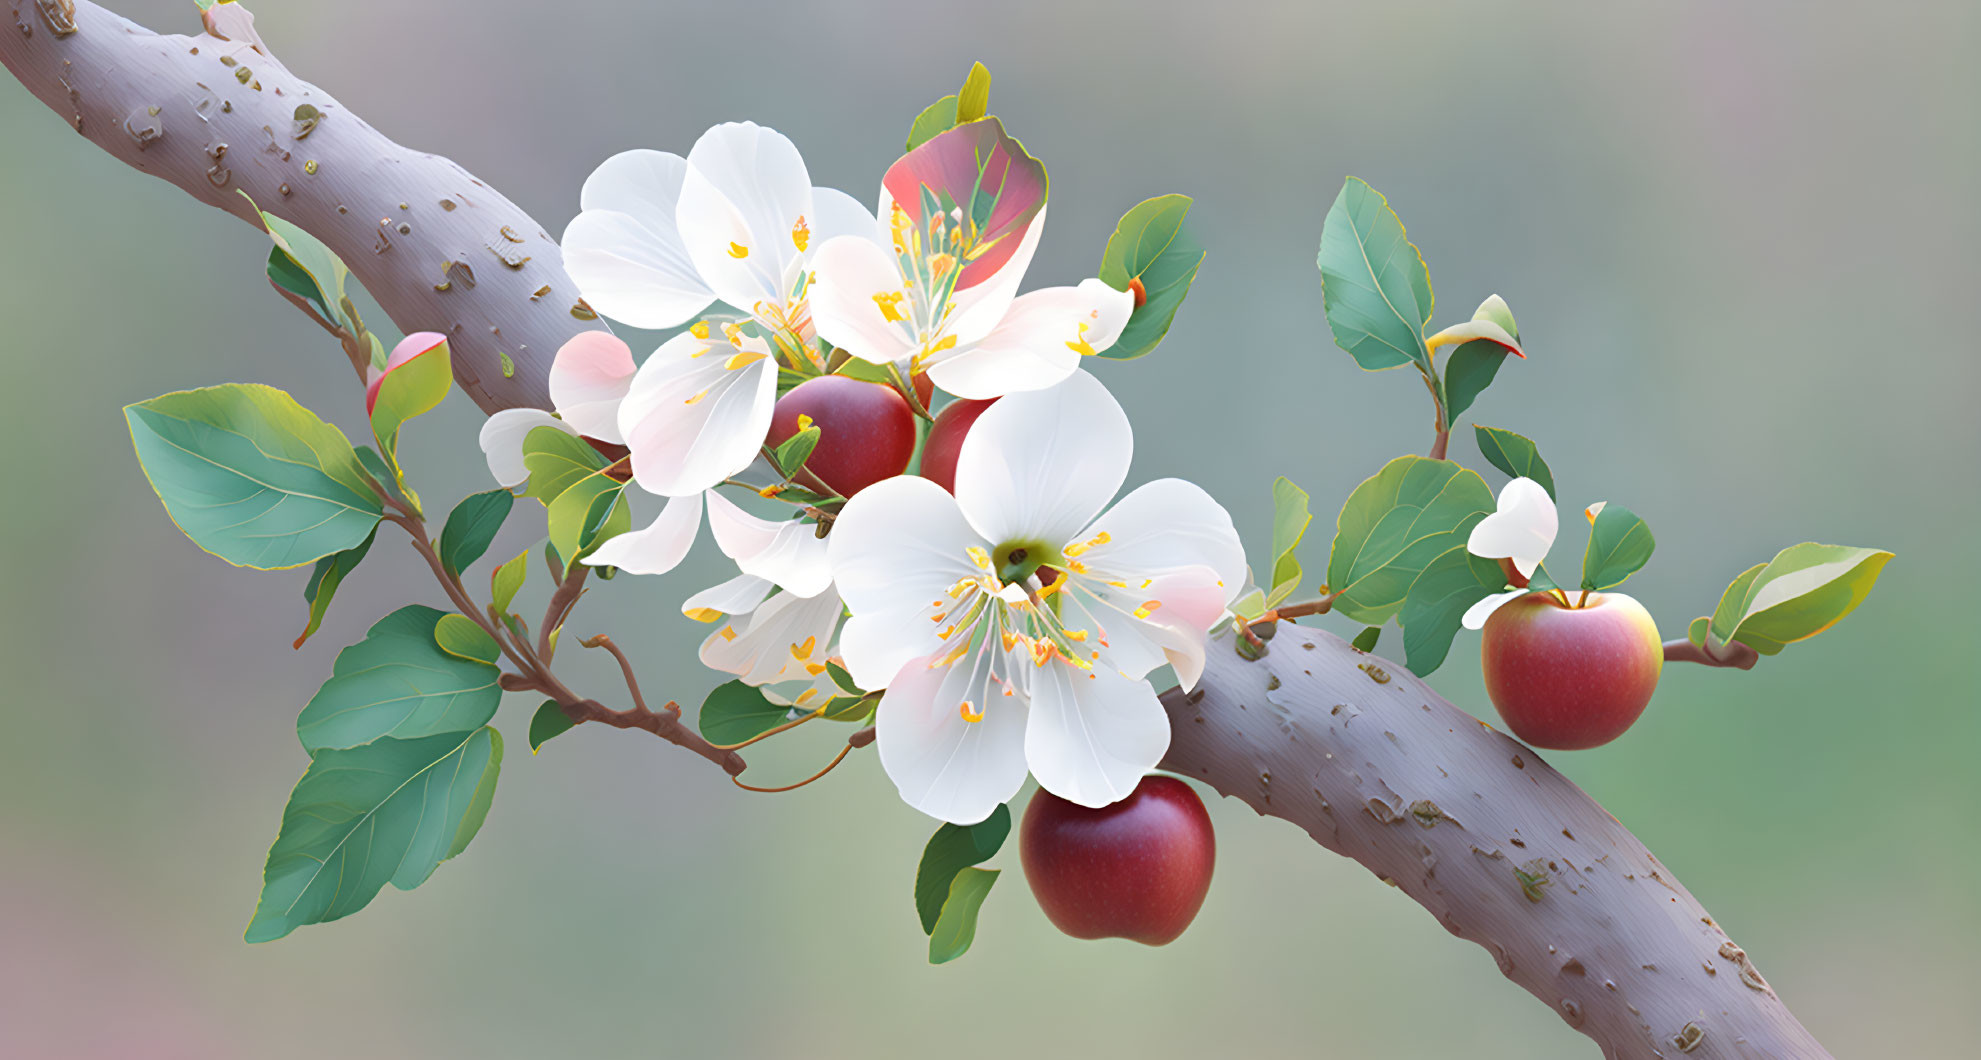 Tranquil depiction of white blossoms and red fruits on a branch